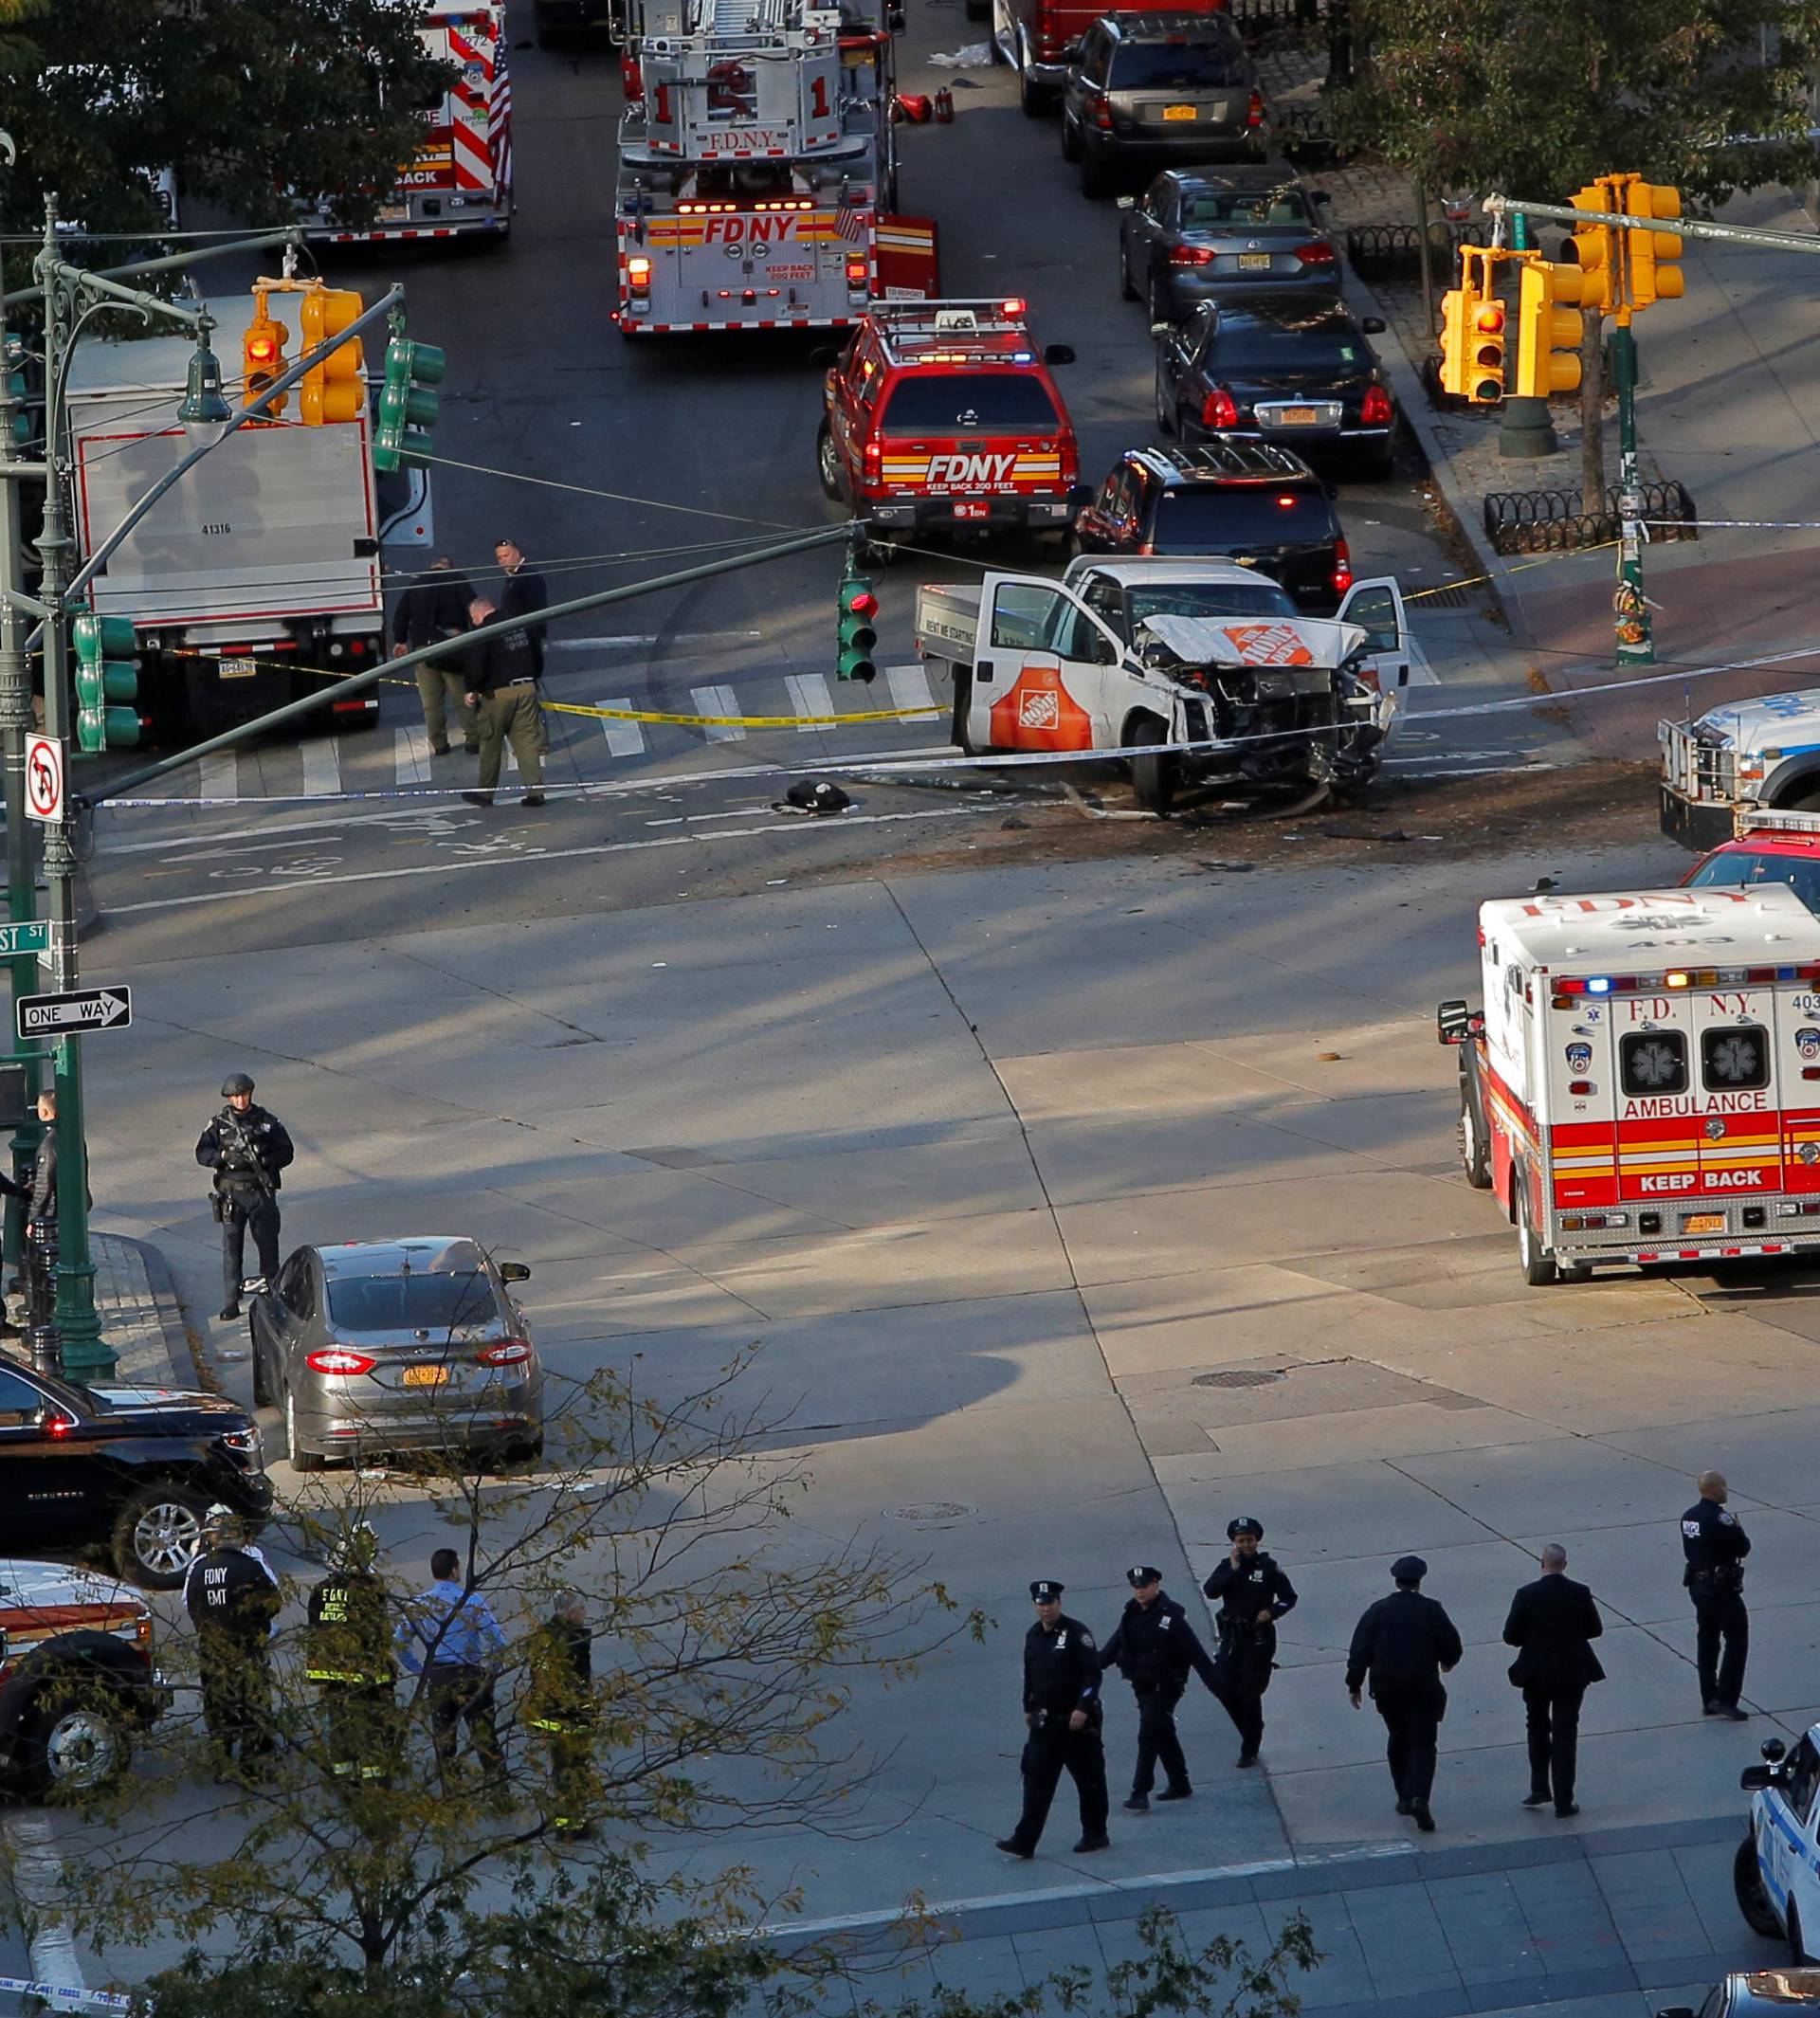 Emergency crews attend the scene of an alleged shooting incident on West Street in Manhattan, New York.